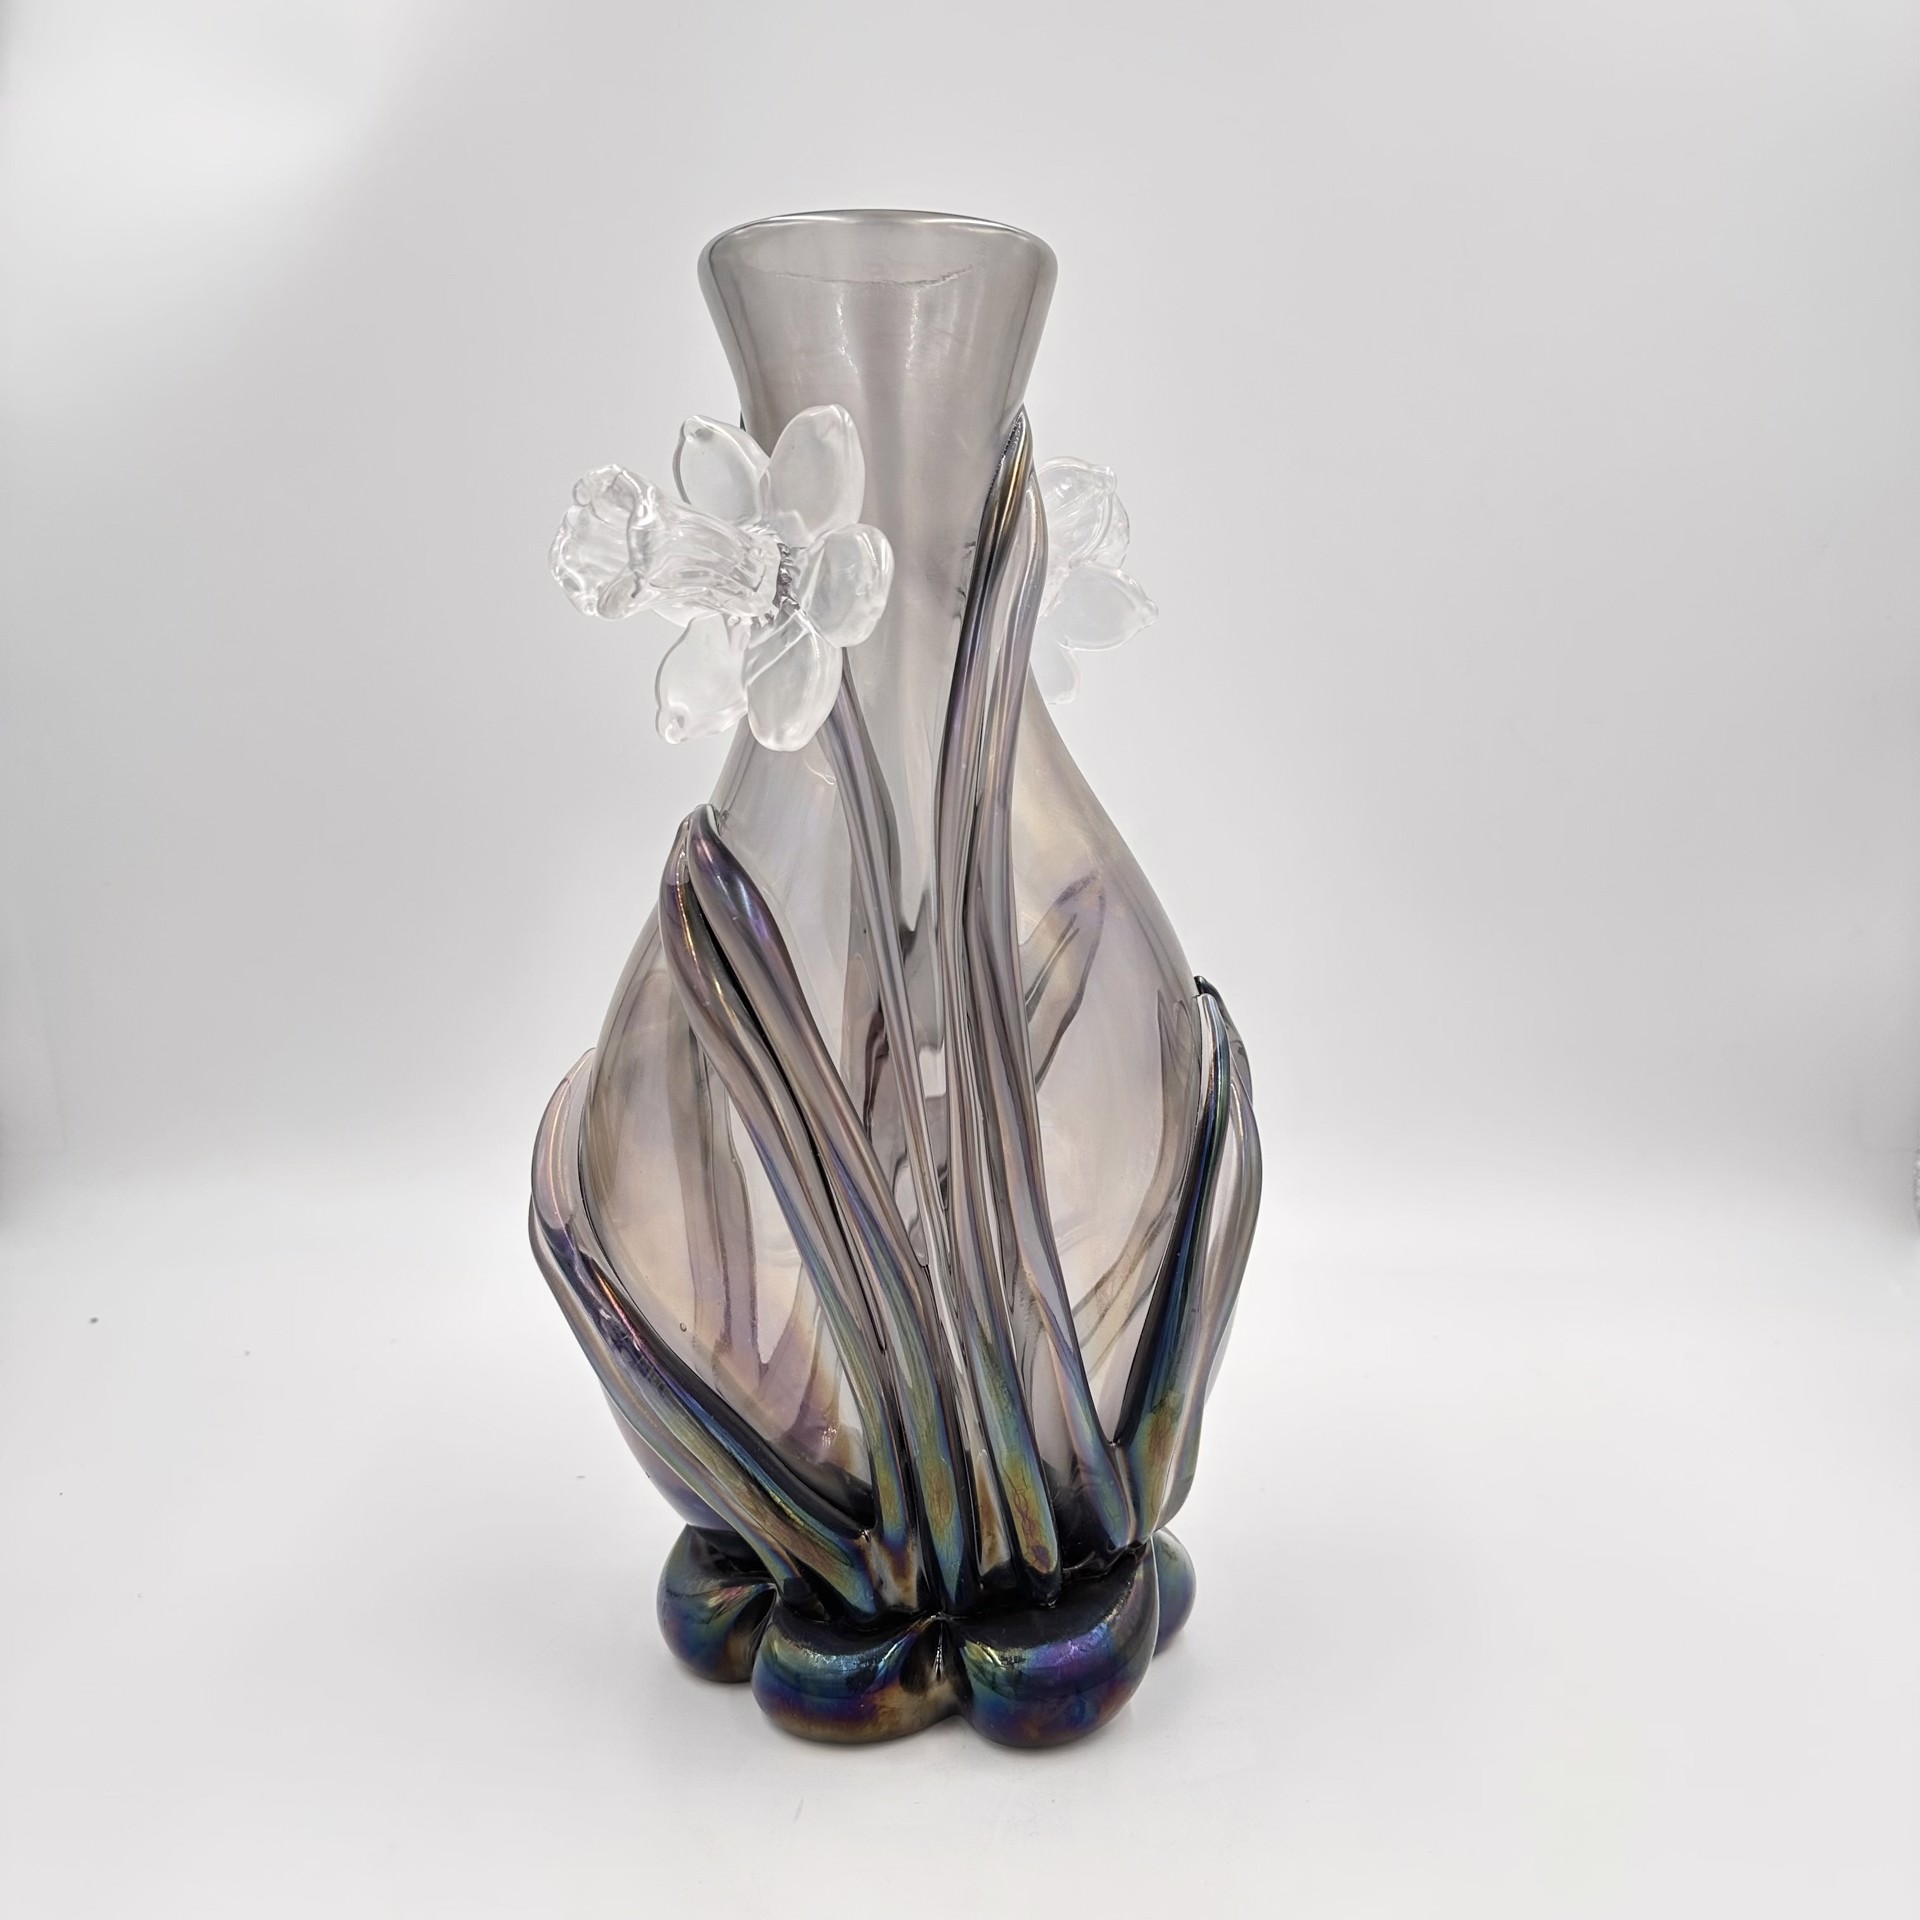 Iridescent Daffodil Vase glass by Tommie Rush